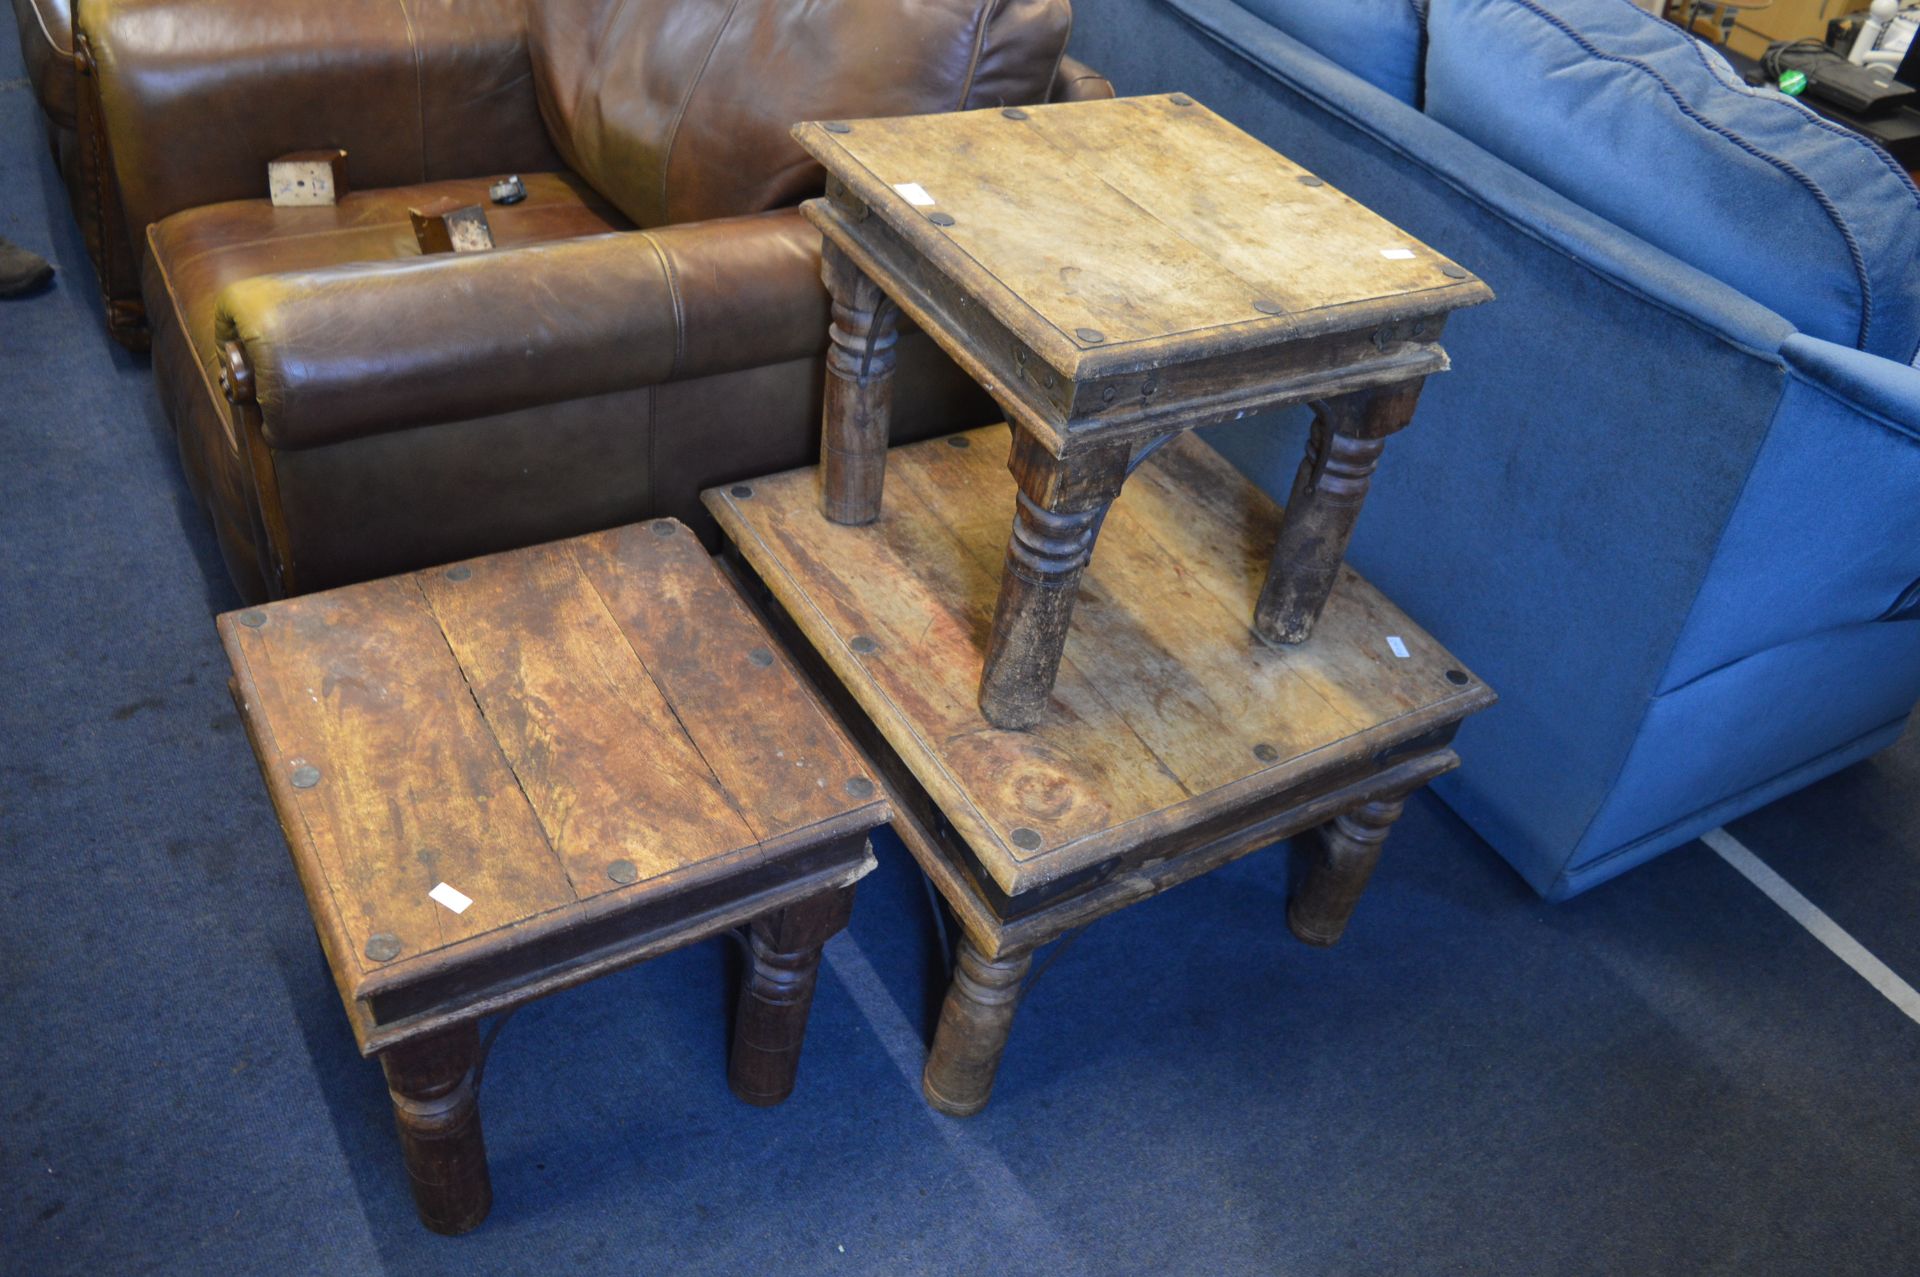 Three Rustic Wooden Coffee Tables